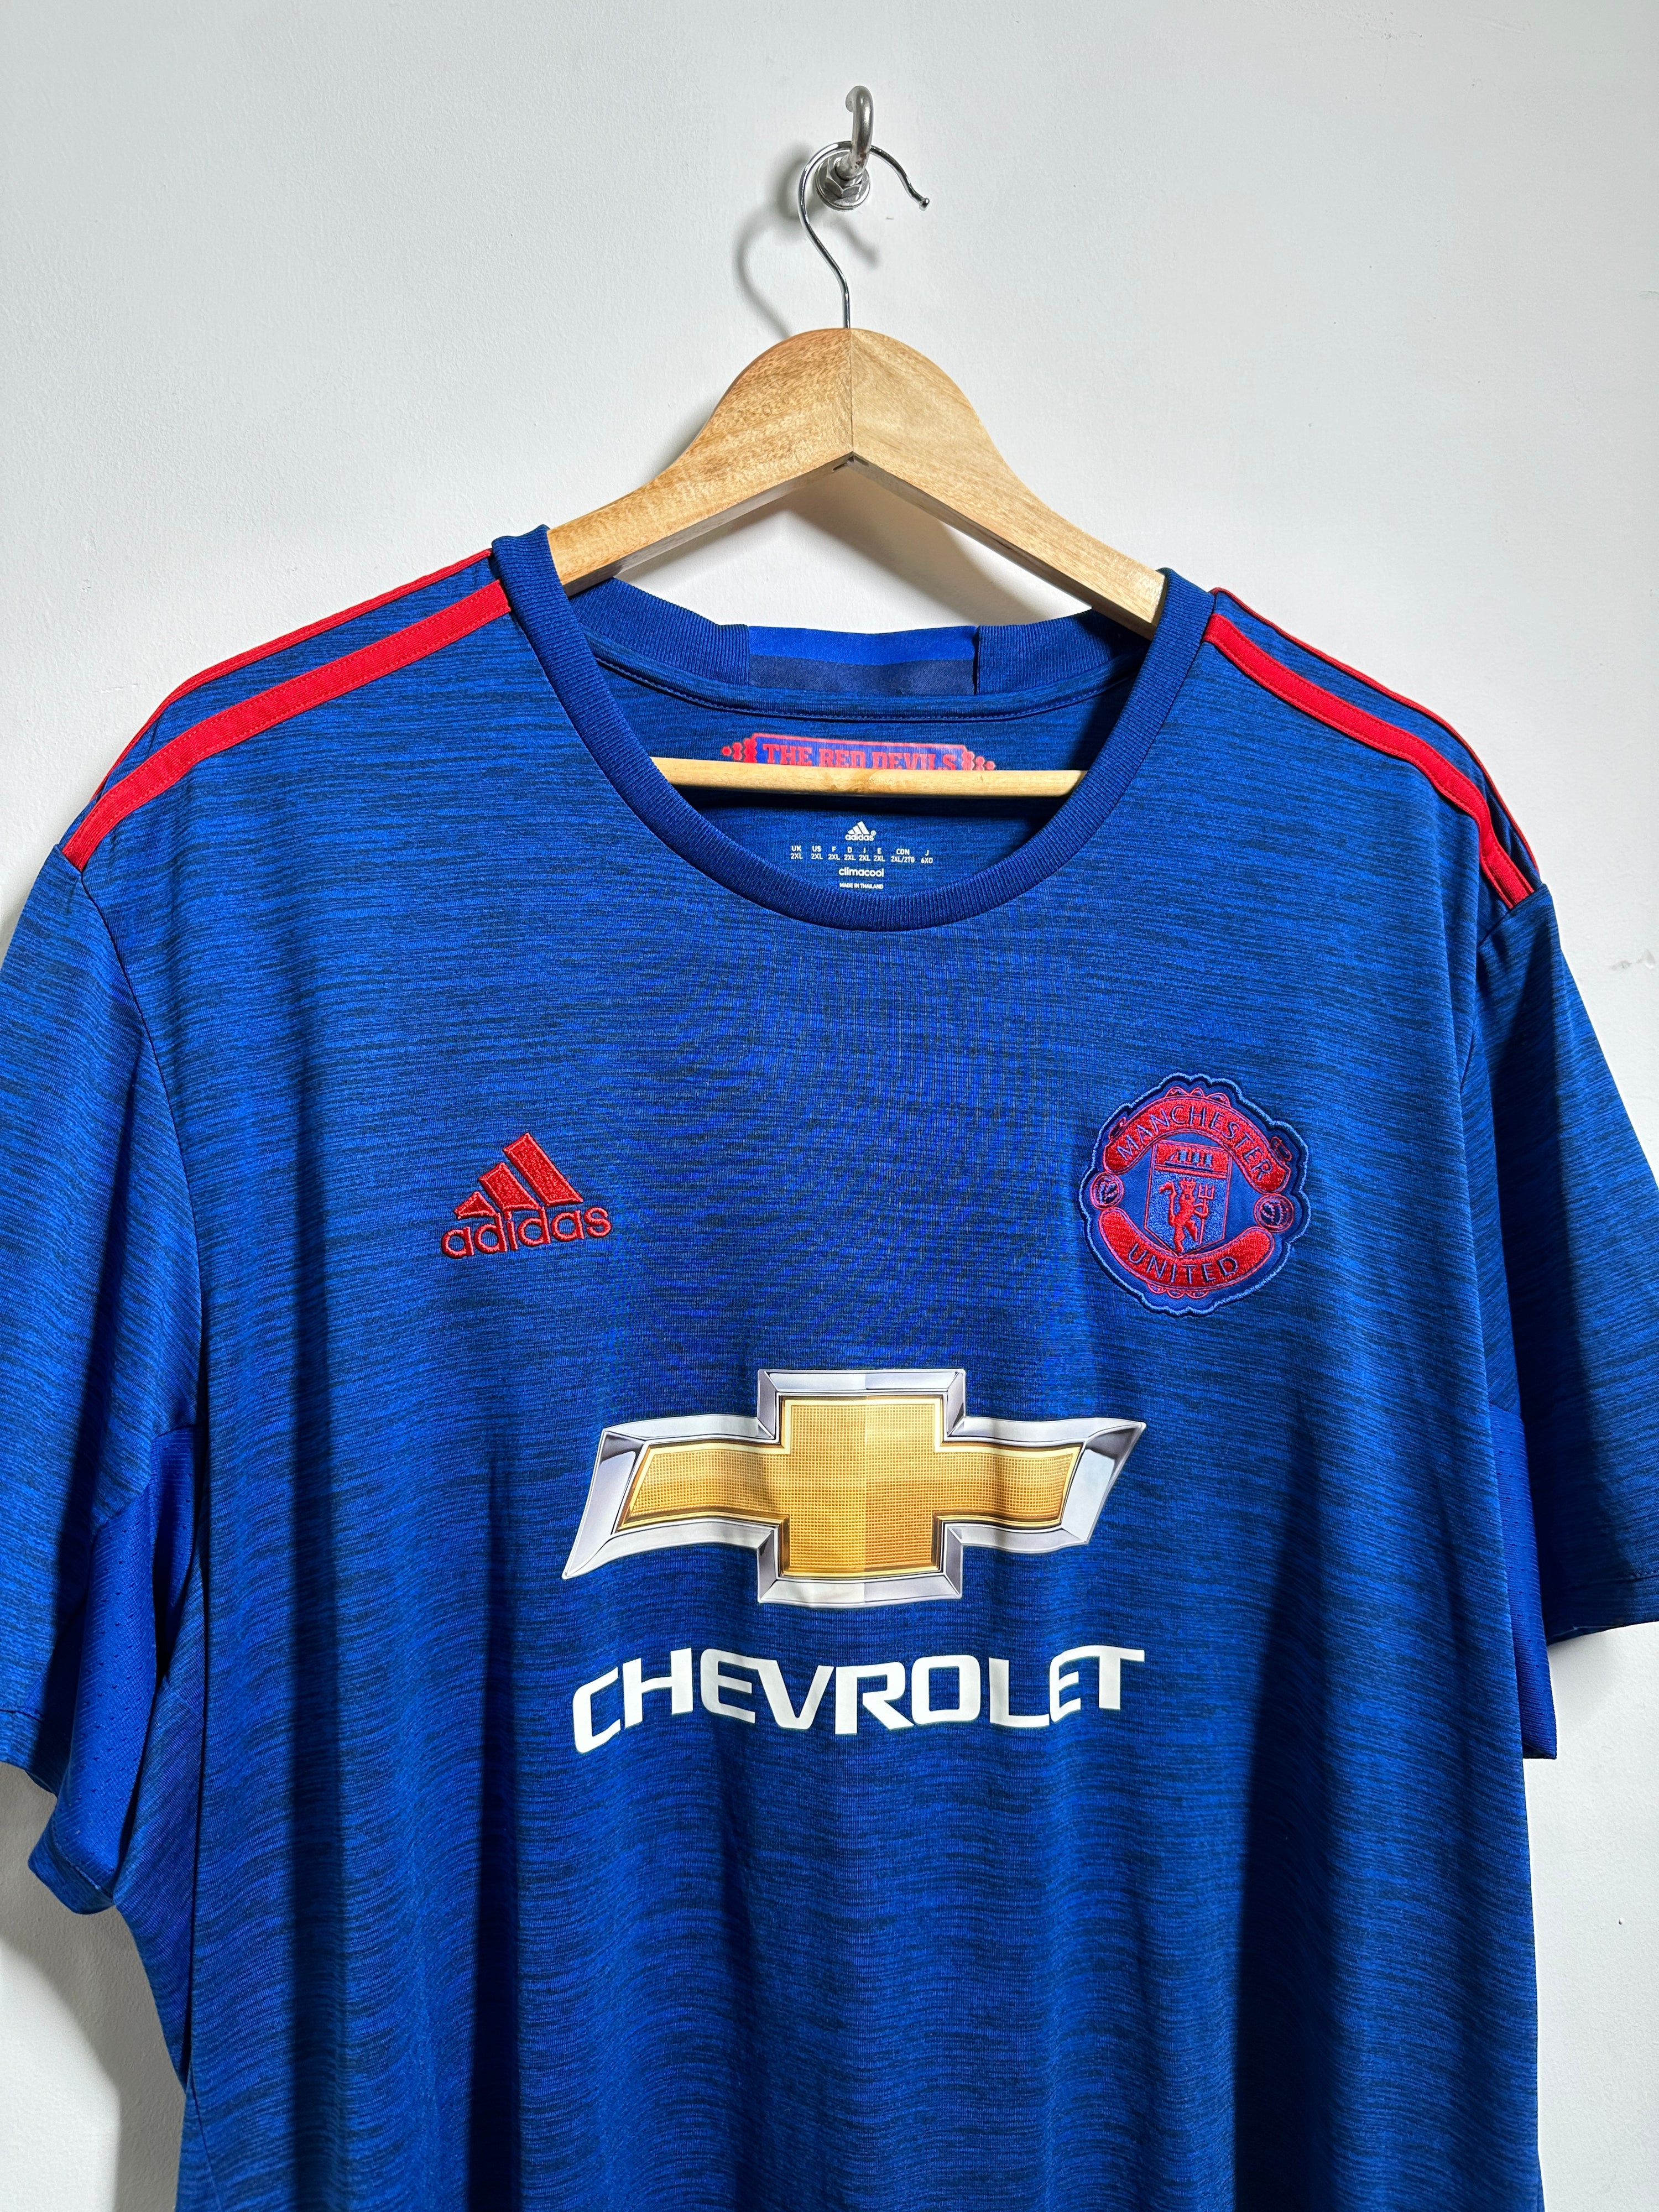 ADIDAS Manchester United 2016/2017 away jersey (100% authentic)